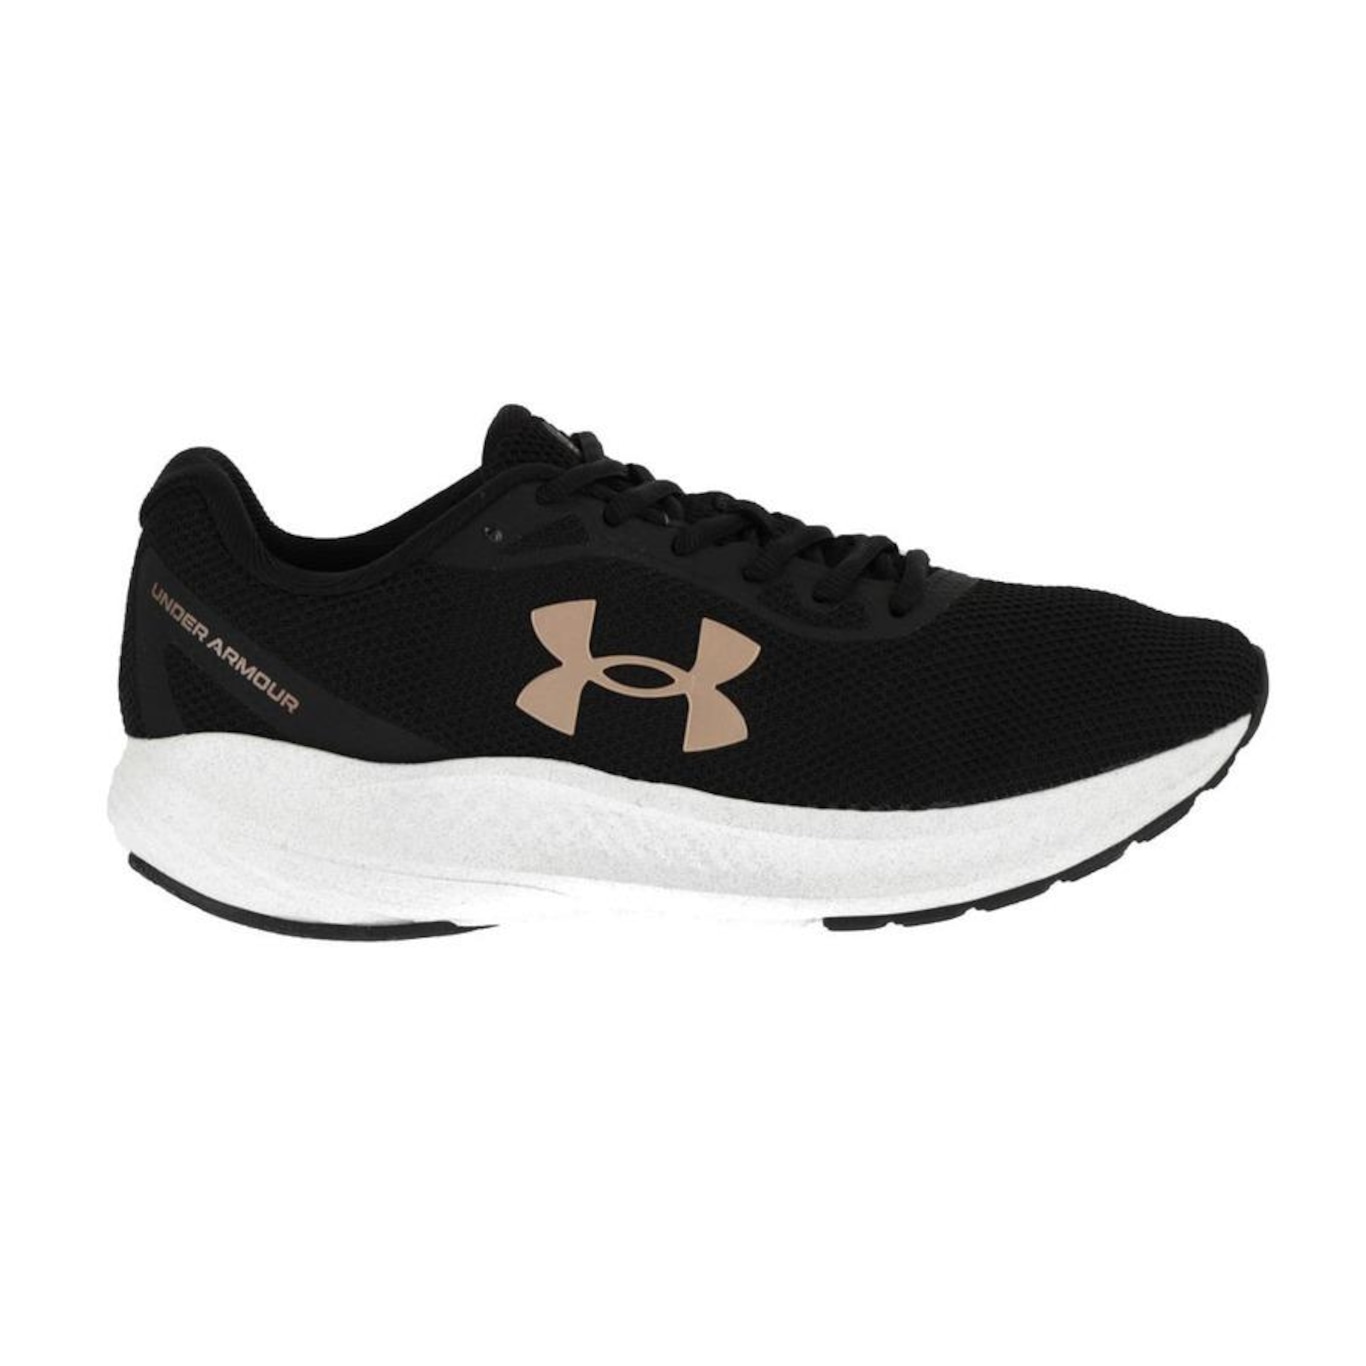 Tênis Under Armour Charged Wing Preto - Adulto